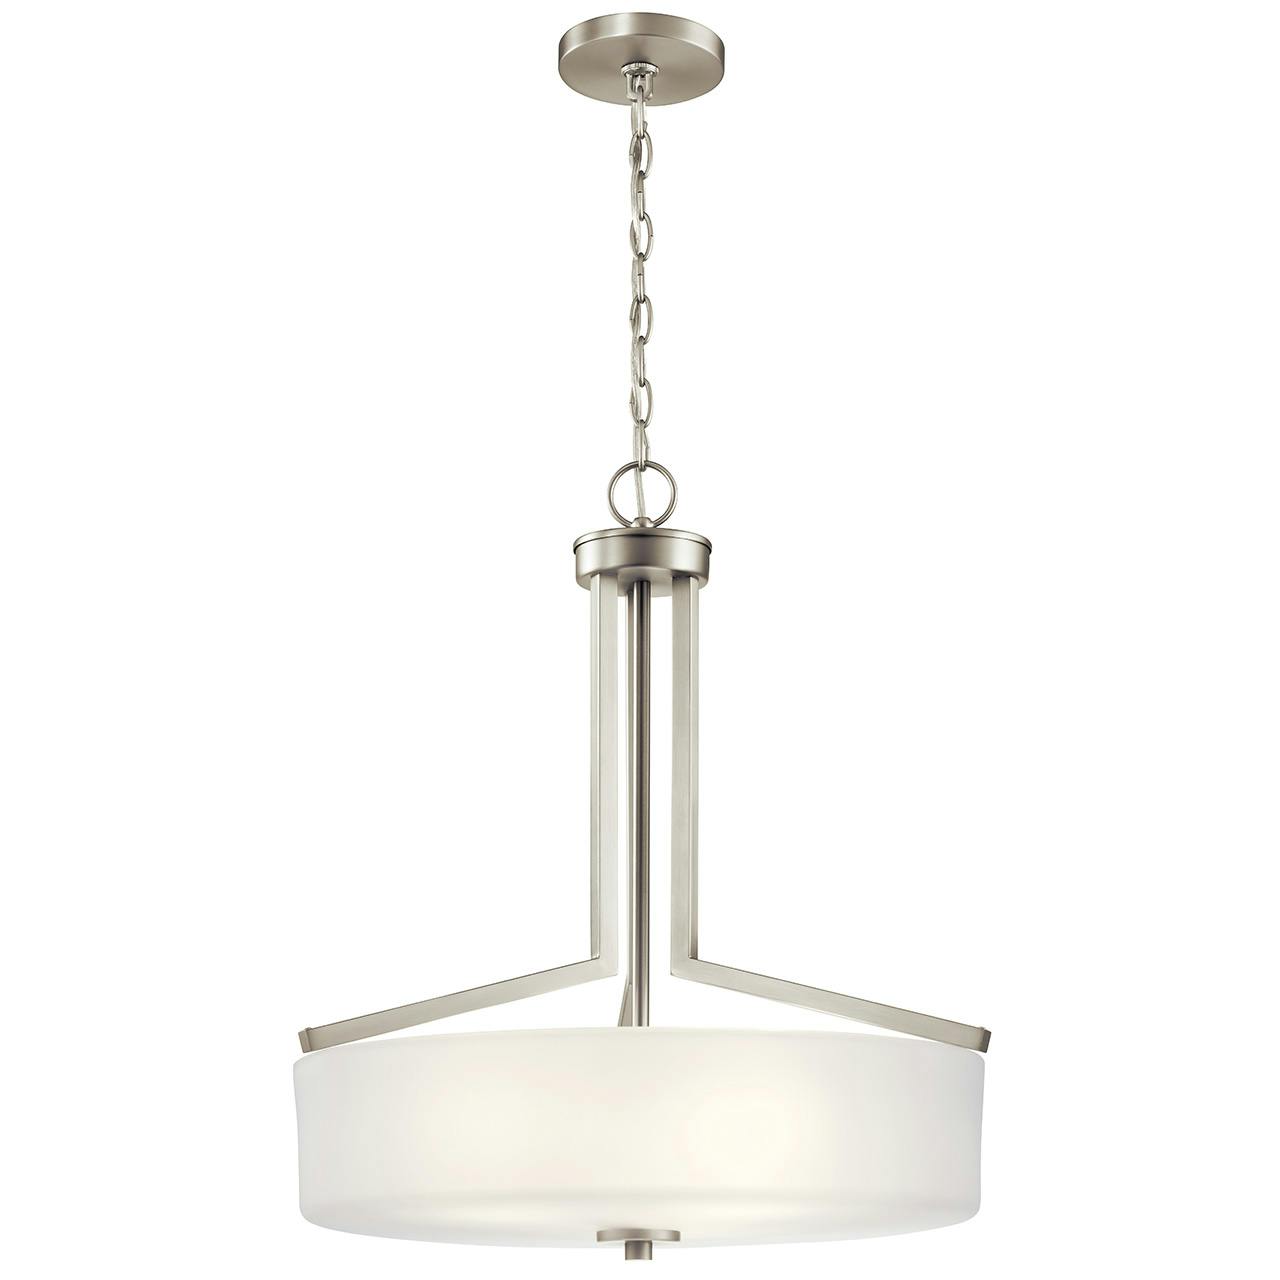 Skagos™ 3 Light Pendant Brushed Nickel on a white background